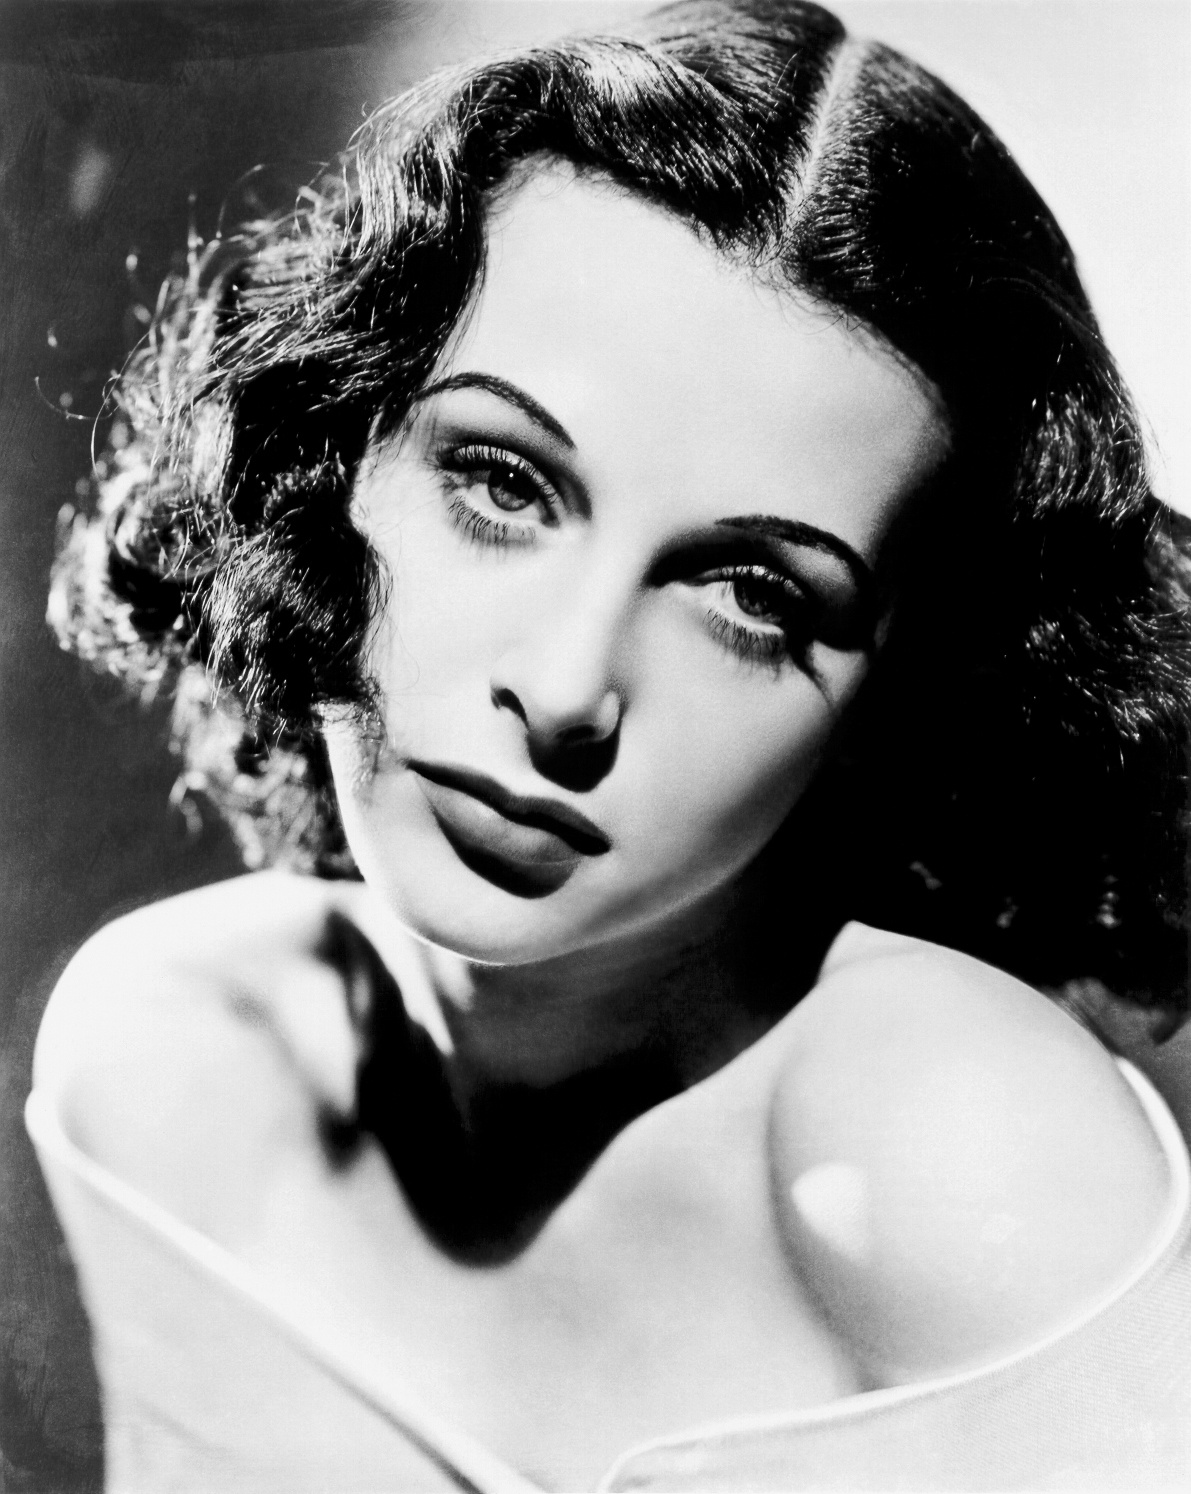 Hedy Lamarr photo gallery - high quality pics of Hedy Lamarr | ThePlace